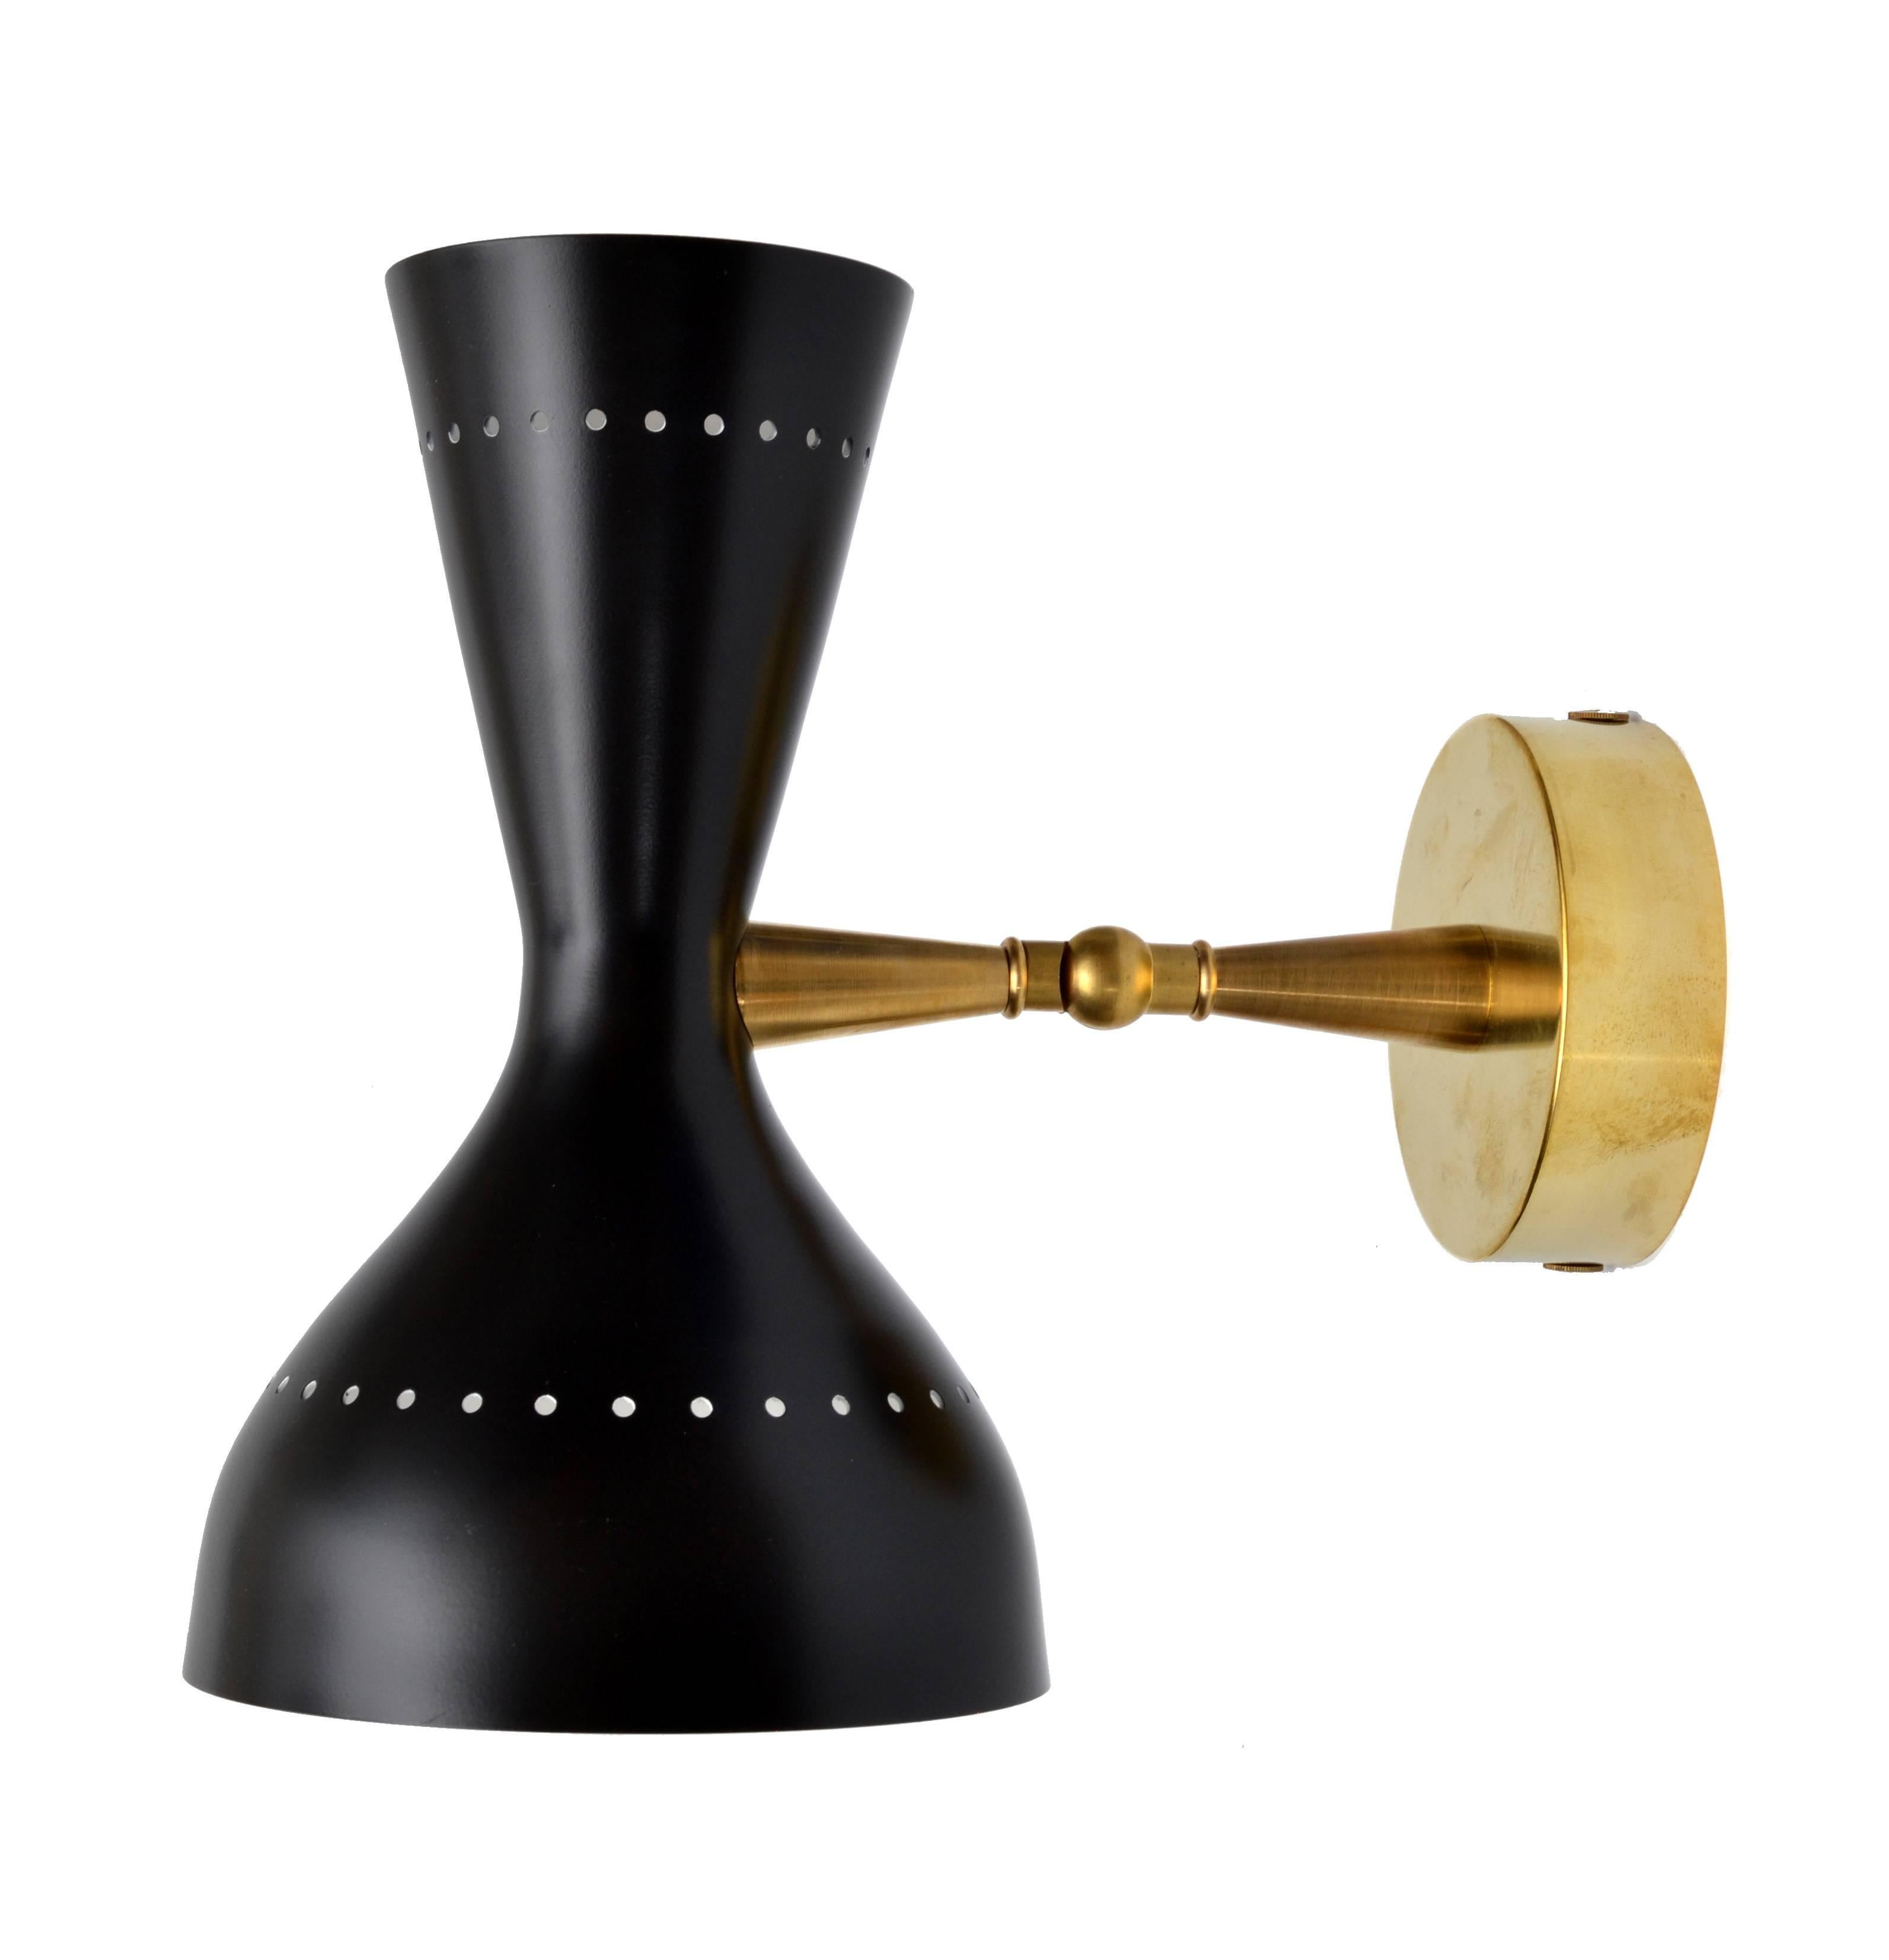 Stunning Italian diabolo style sconce in brass with black metal shade.
Dual lamp shade houses one small (E14-40W) bulb and a larger shade for a (E27-60W) standard bulb.
The arm and head are adjustable.